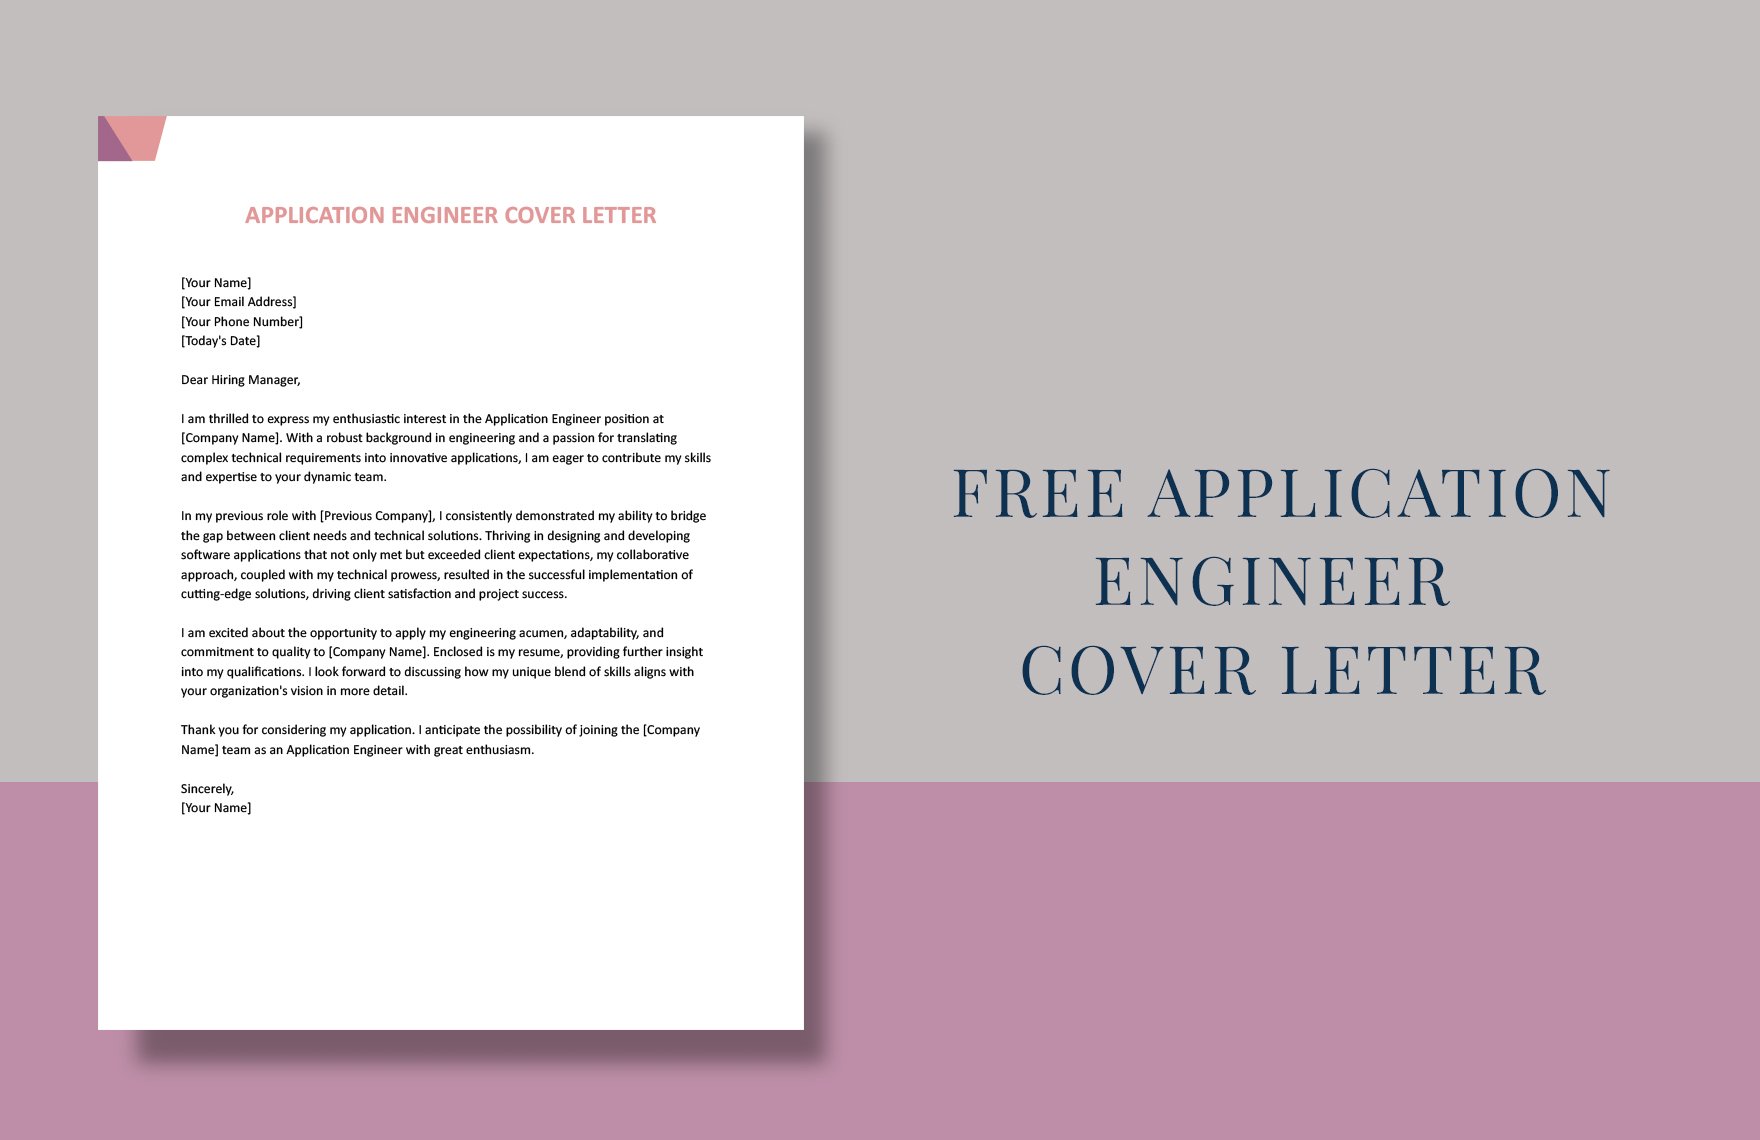 Free Application Engineer Cover Letter